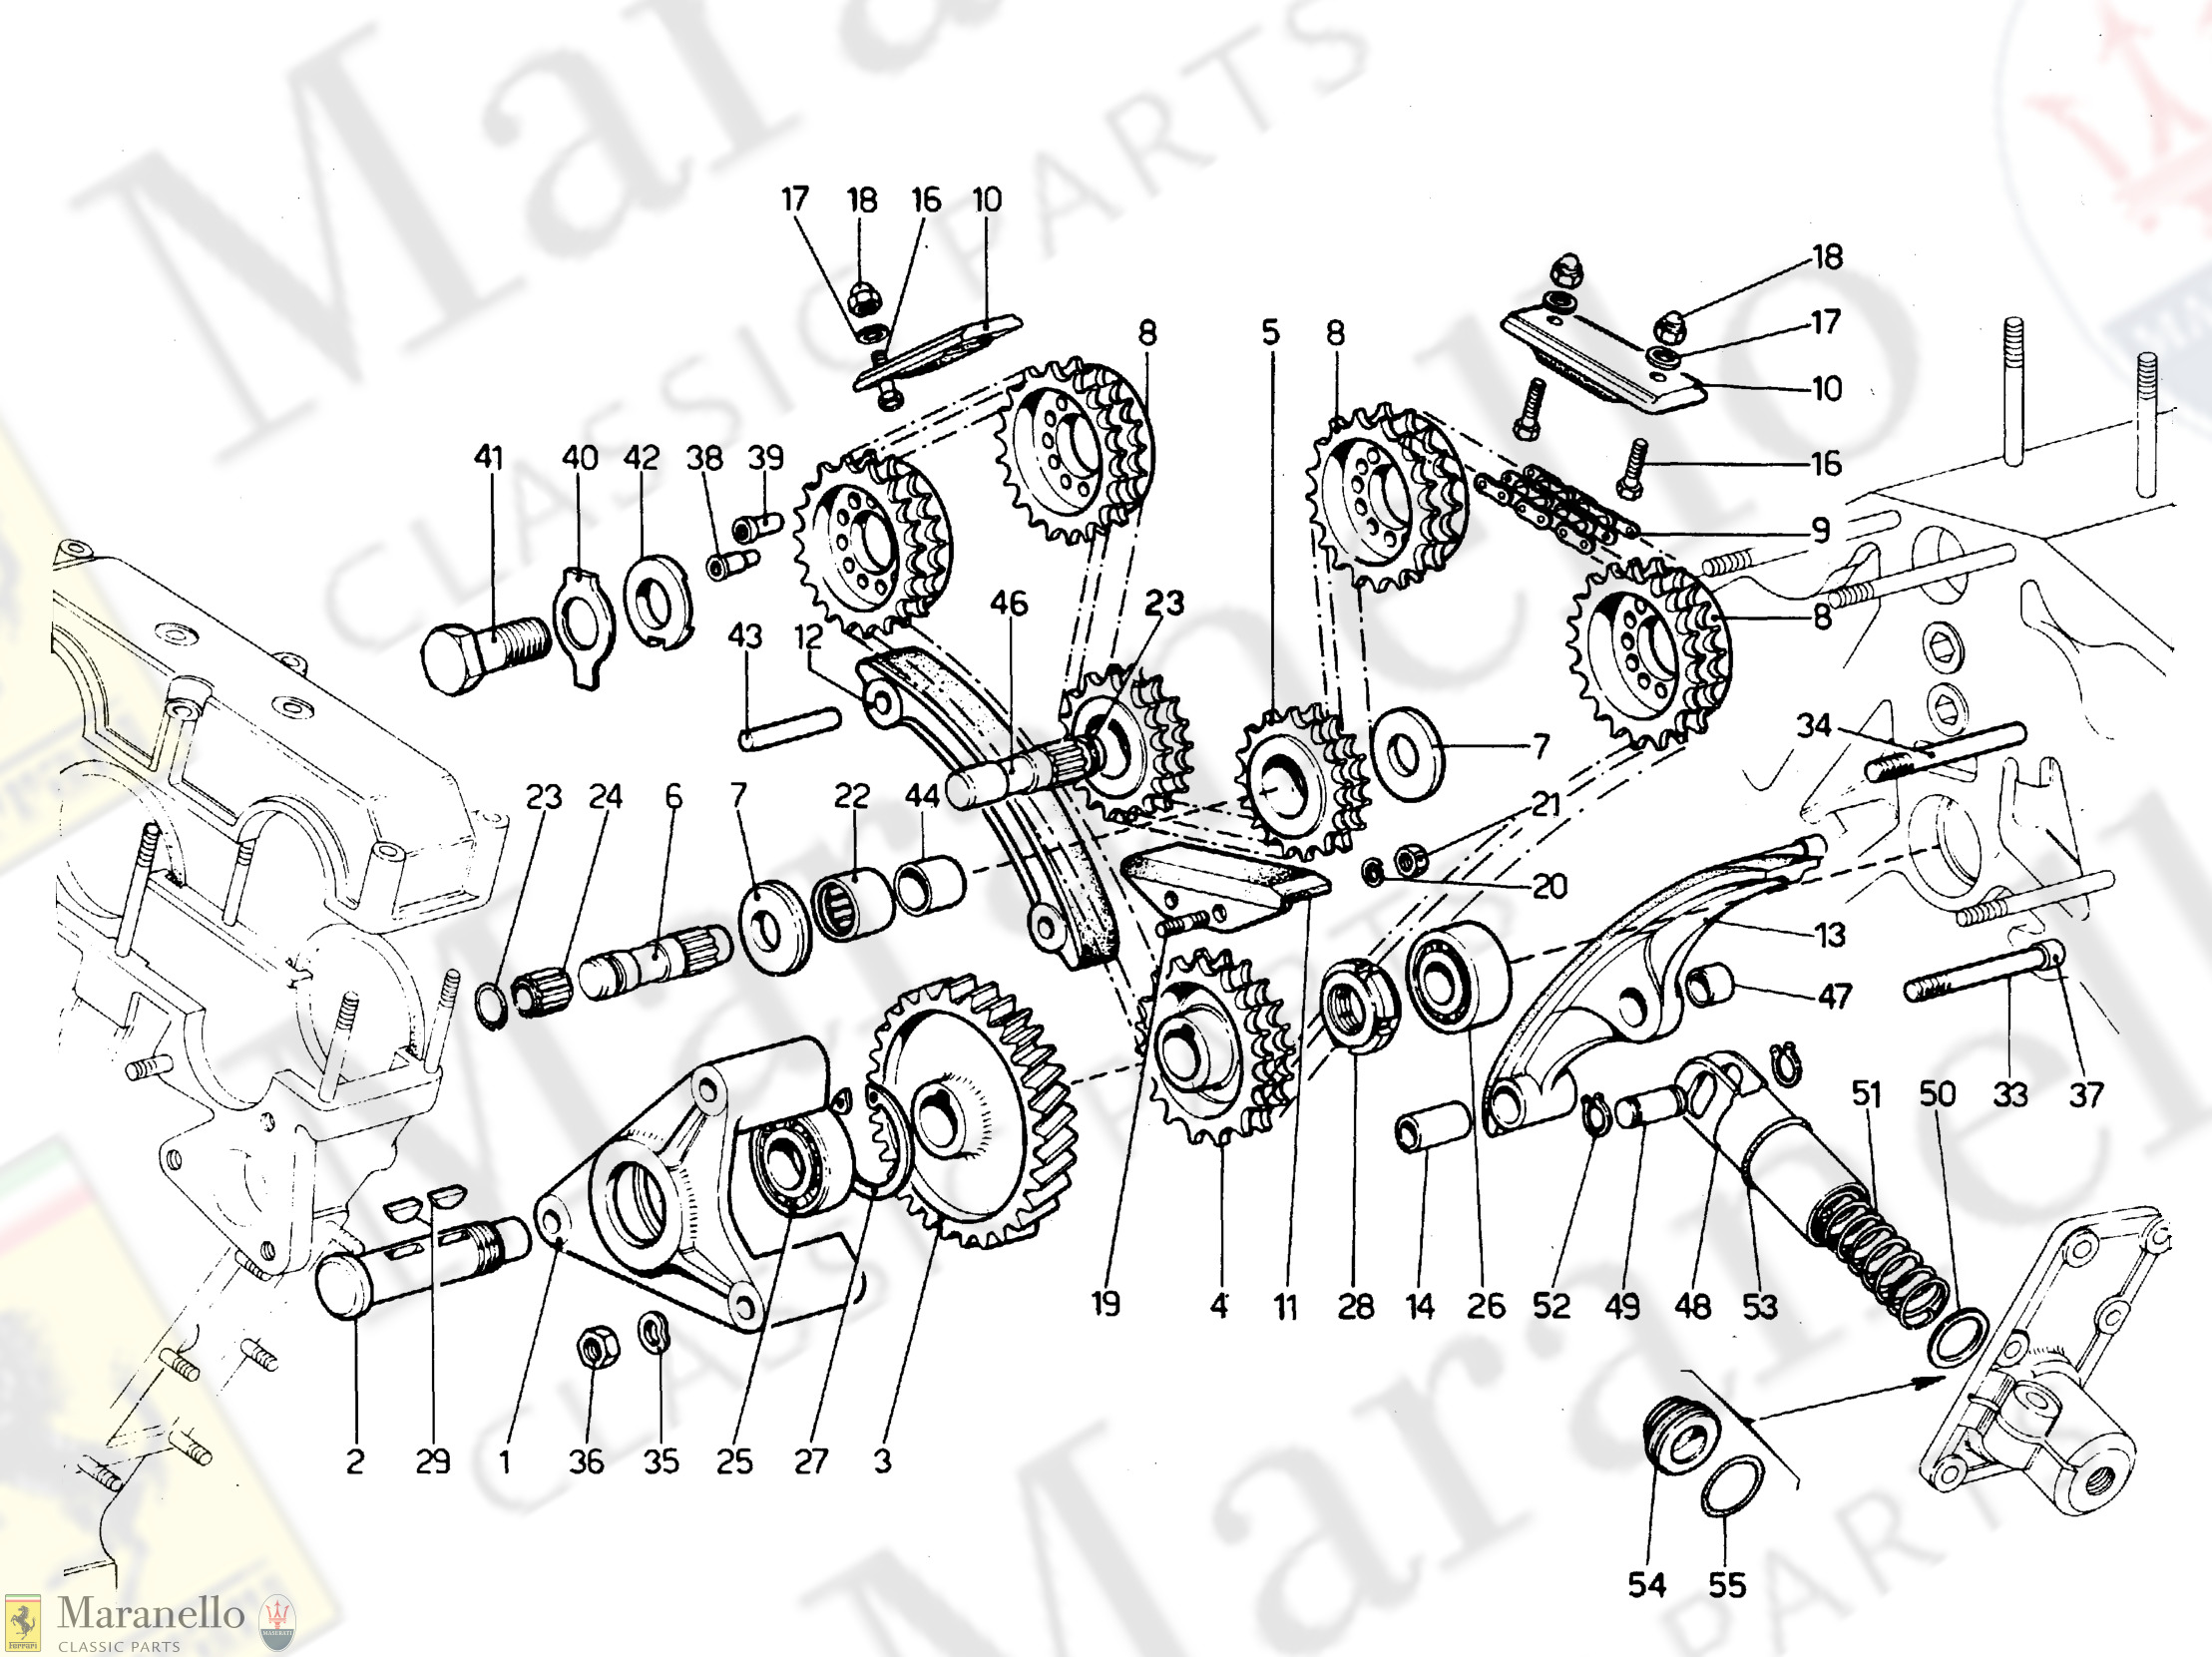 007A - Timing Chains - Revision Oct 1972